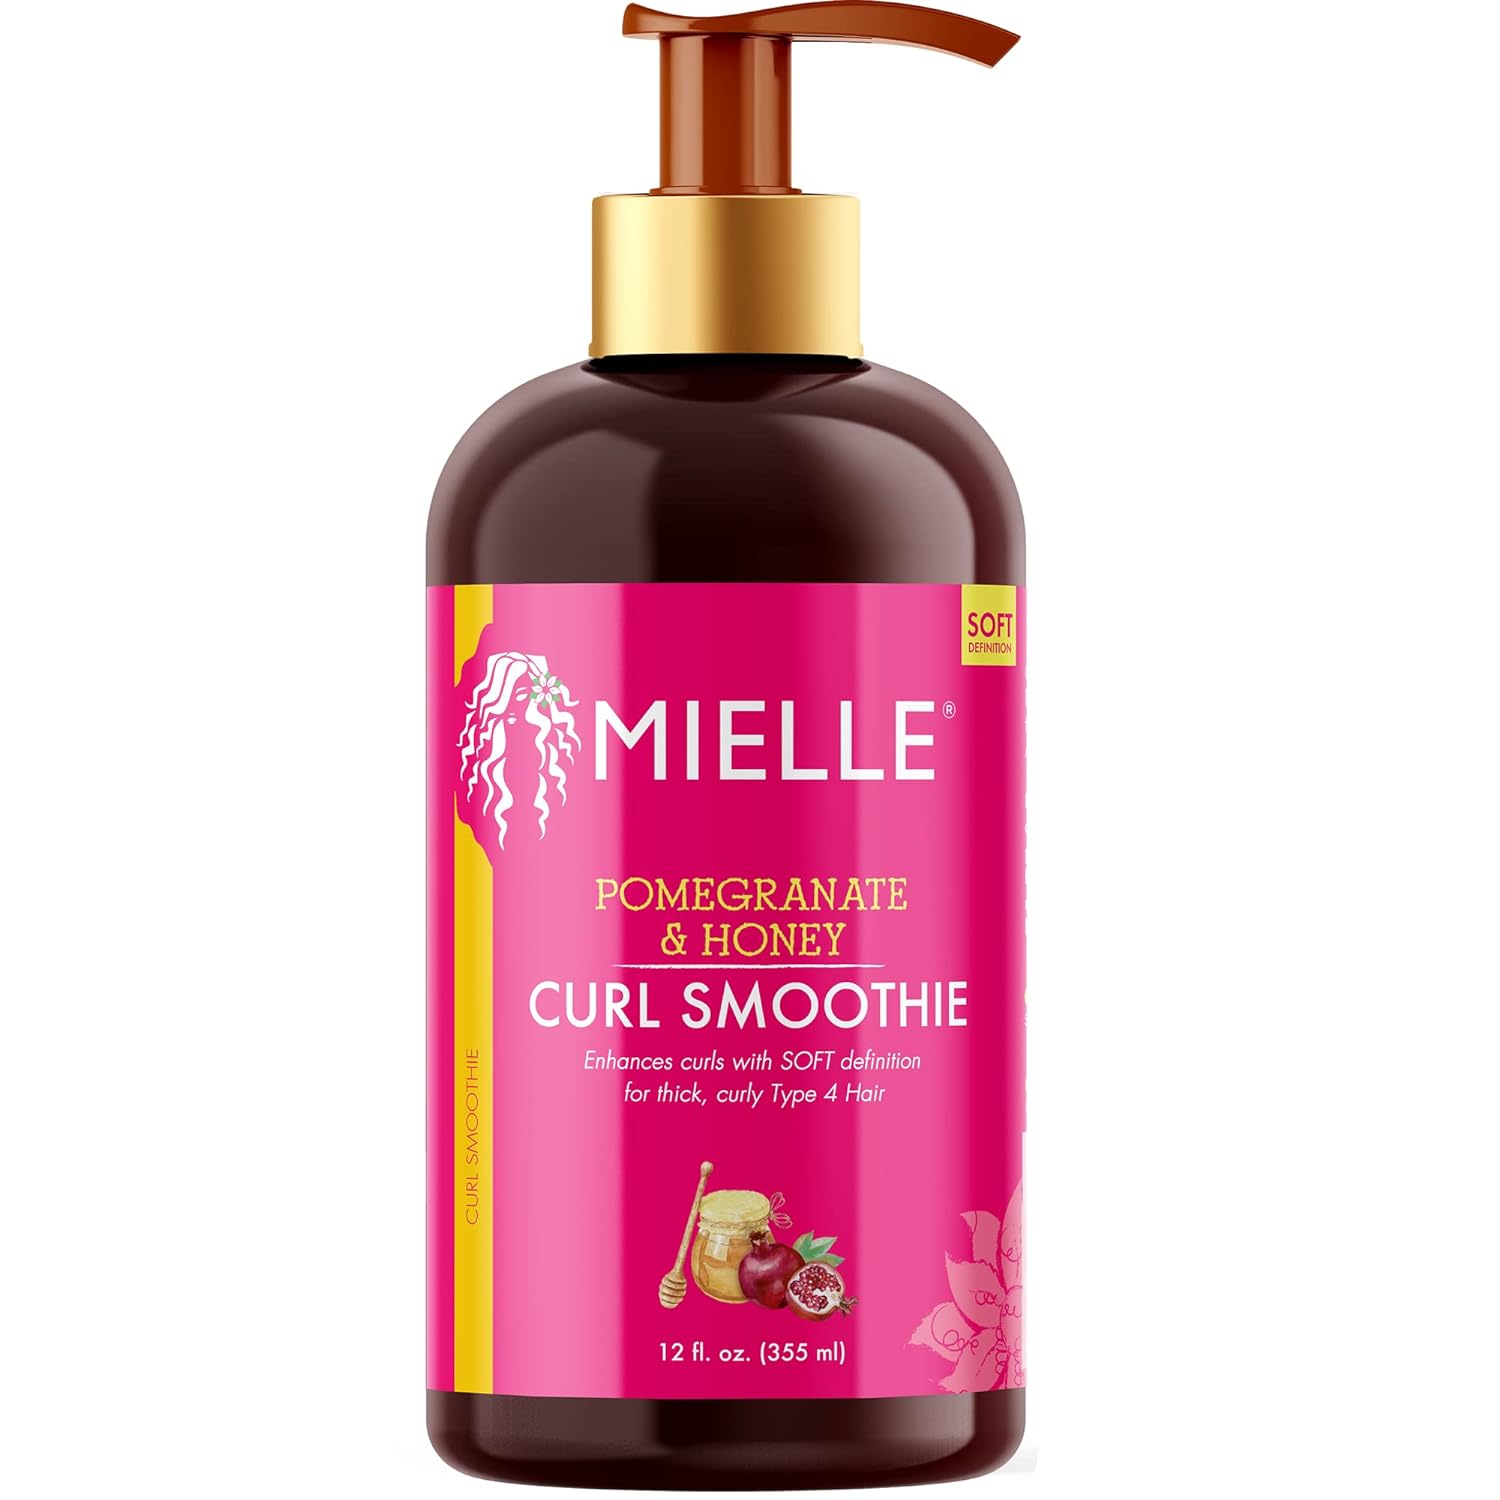 Mielle Organics Curl Smoothie with Pomegranate and Honey Cream, 12 Oz